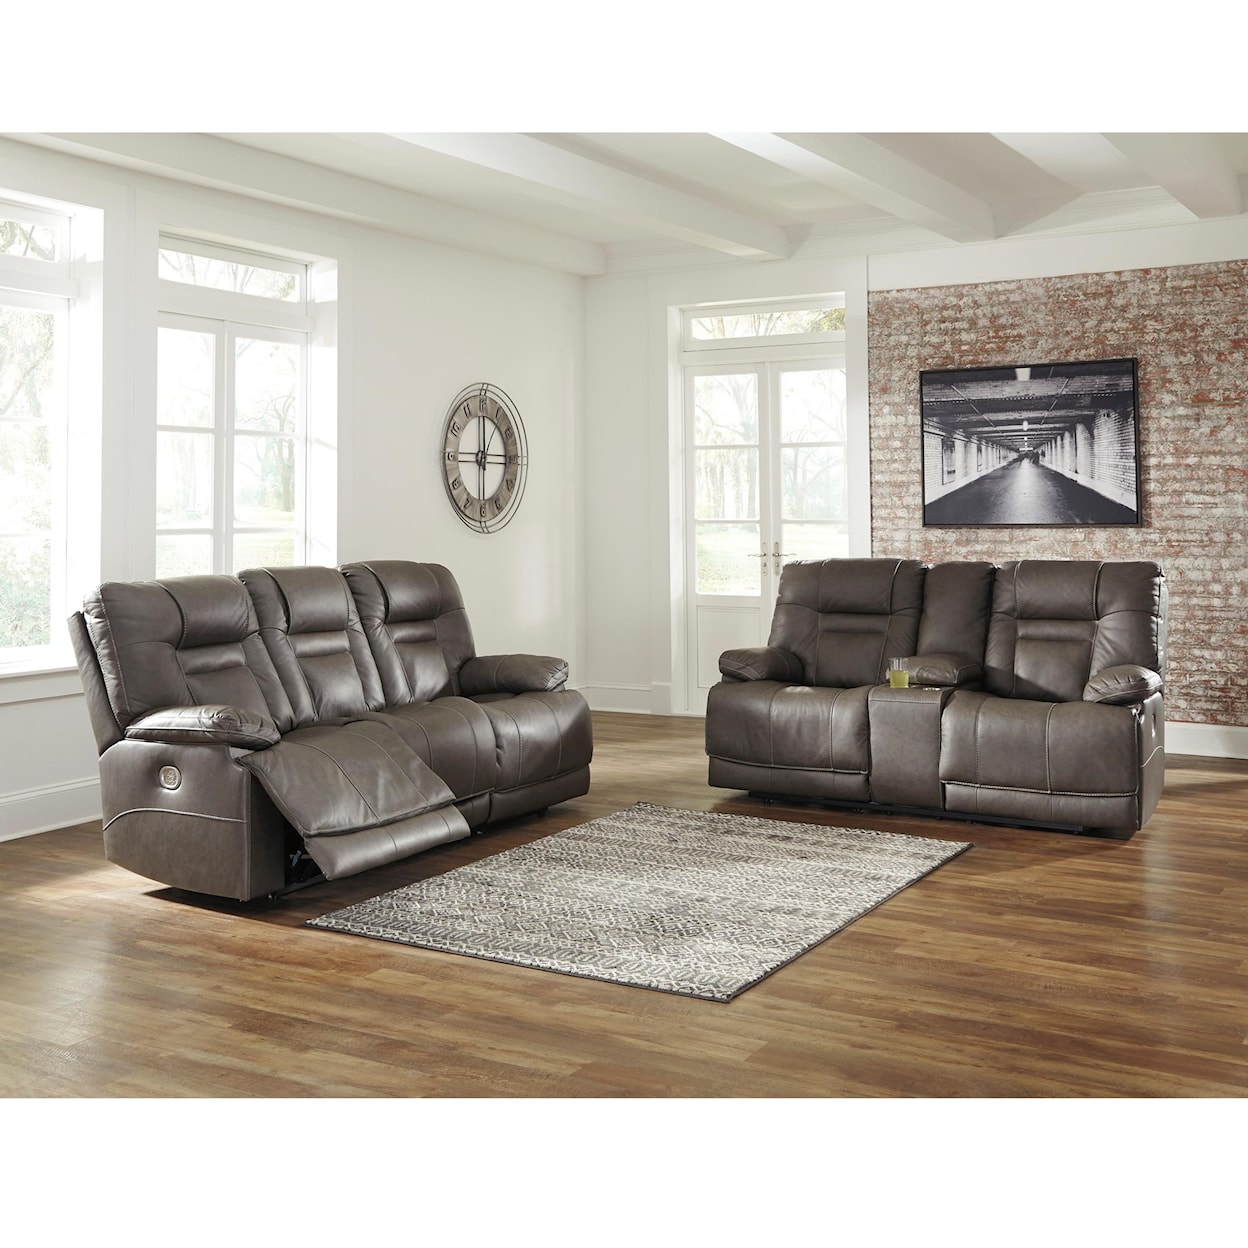 Michael Alan Select Wurstrow Reclining Living Room Group